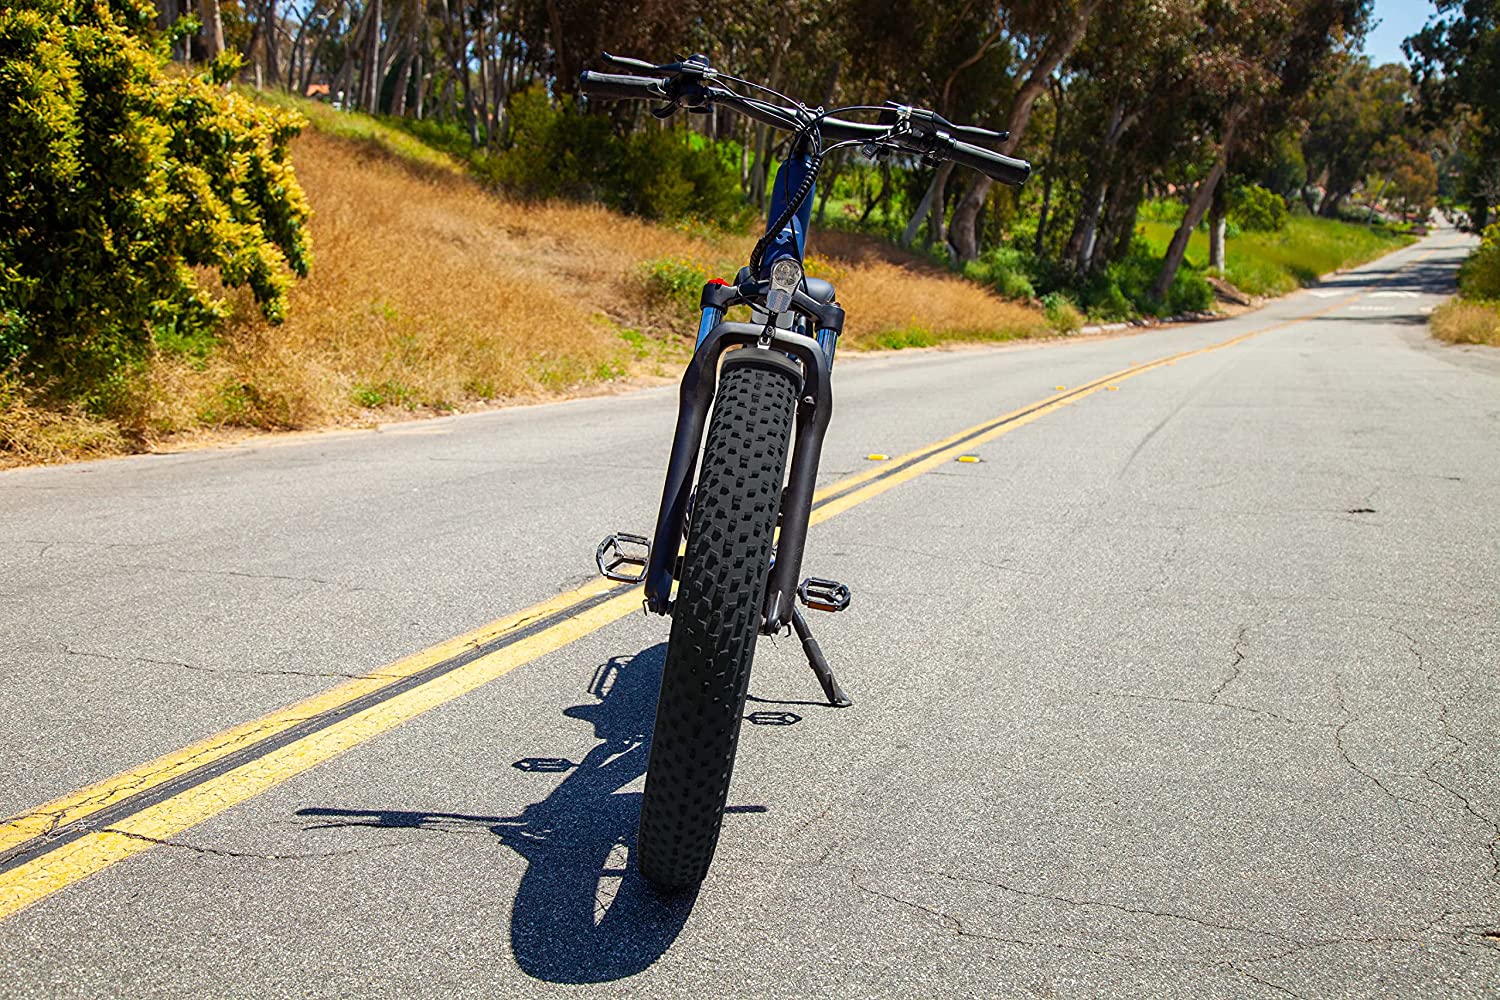 Purchase the EZ Breeze Elite Today and Experience the Joy of Electric Biking!